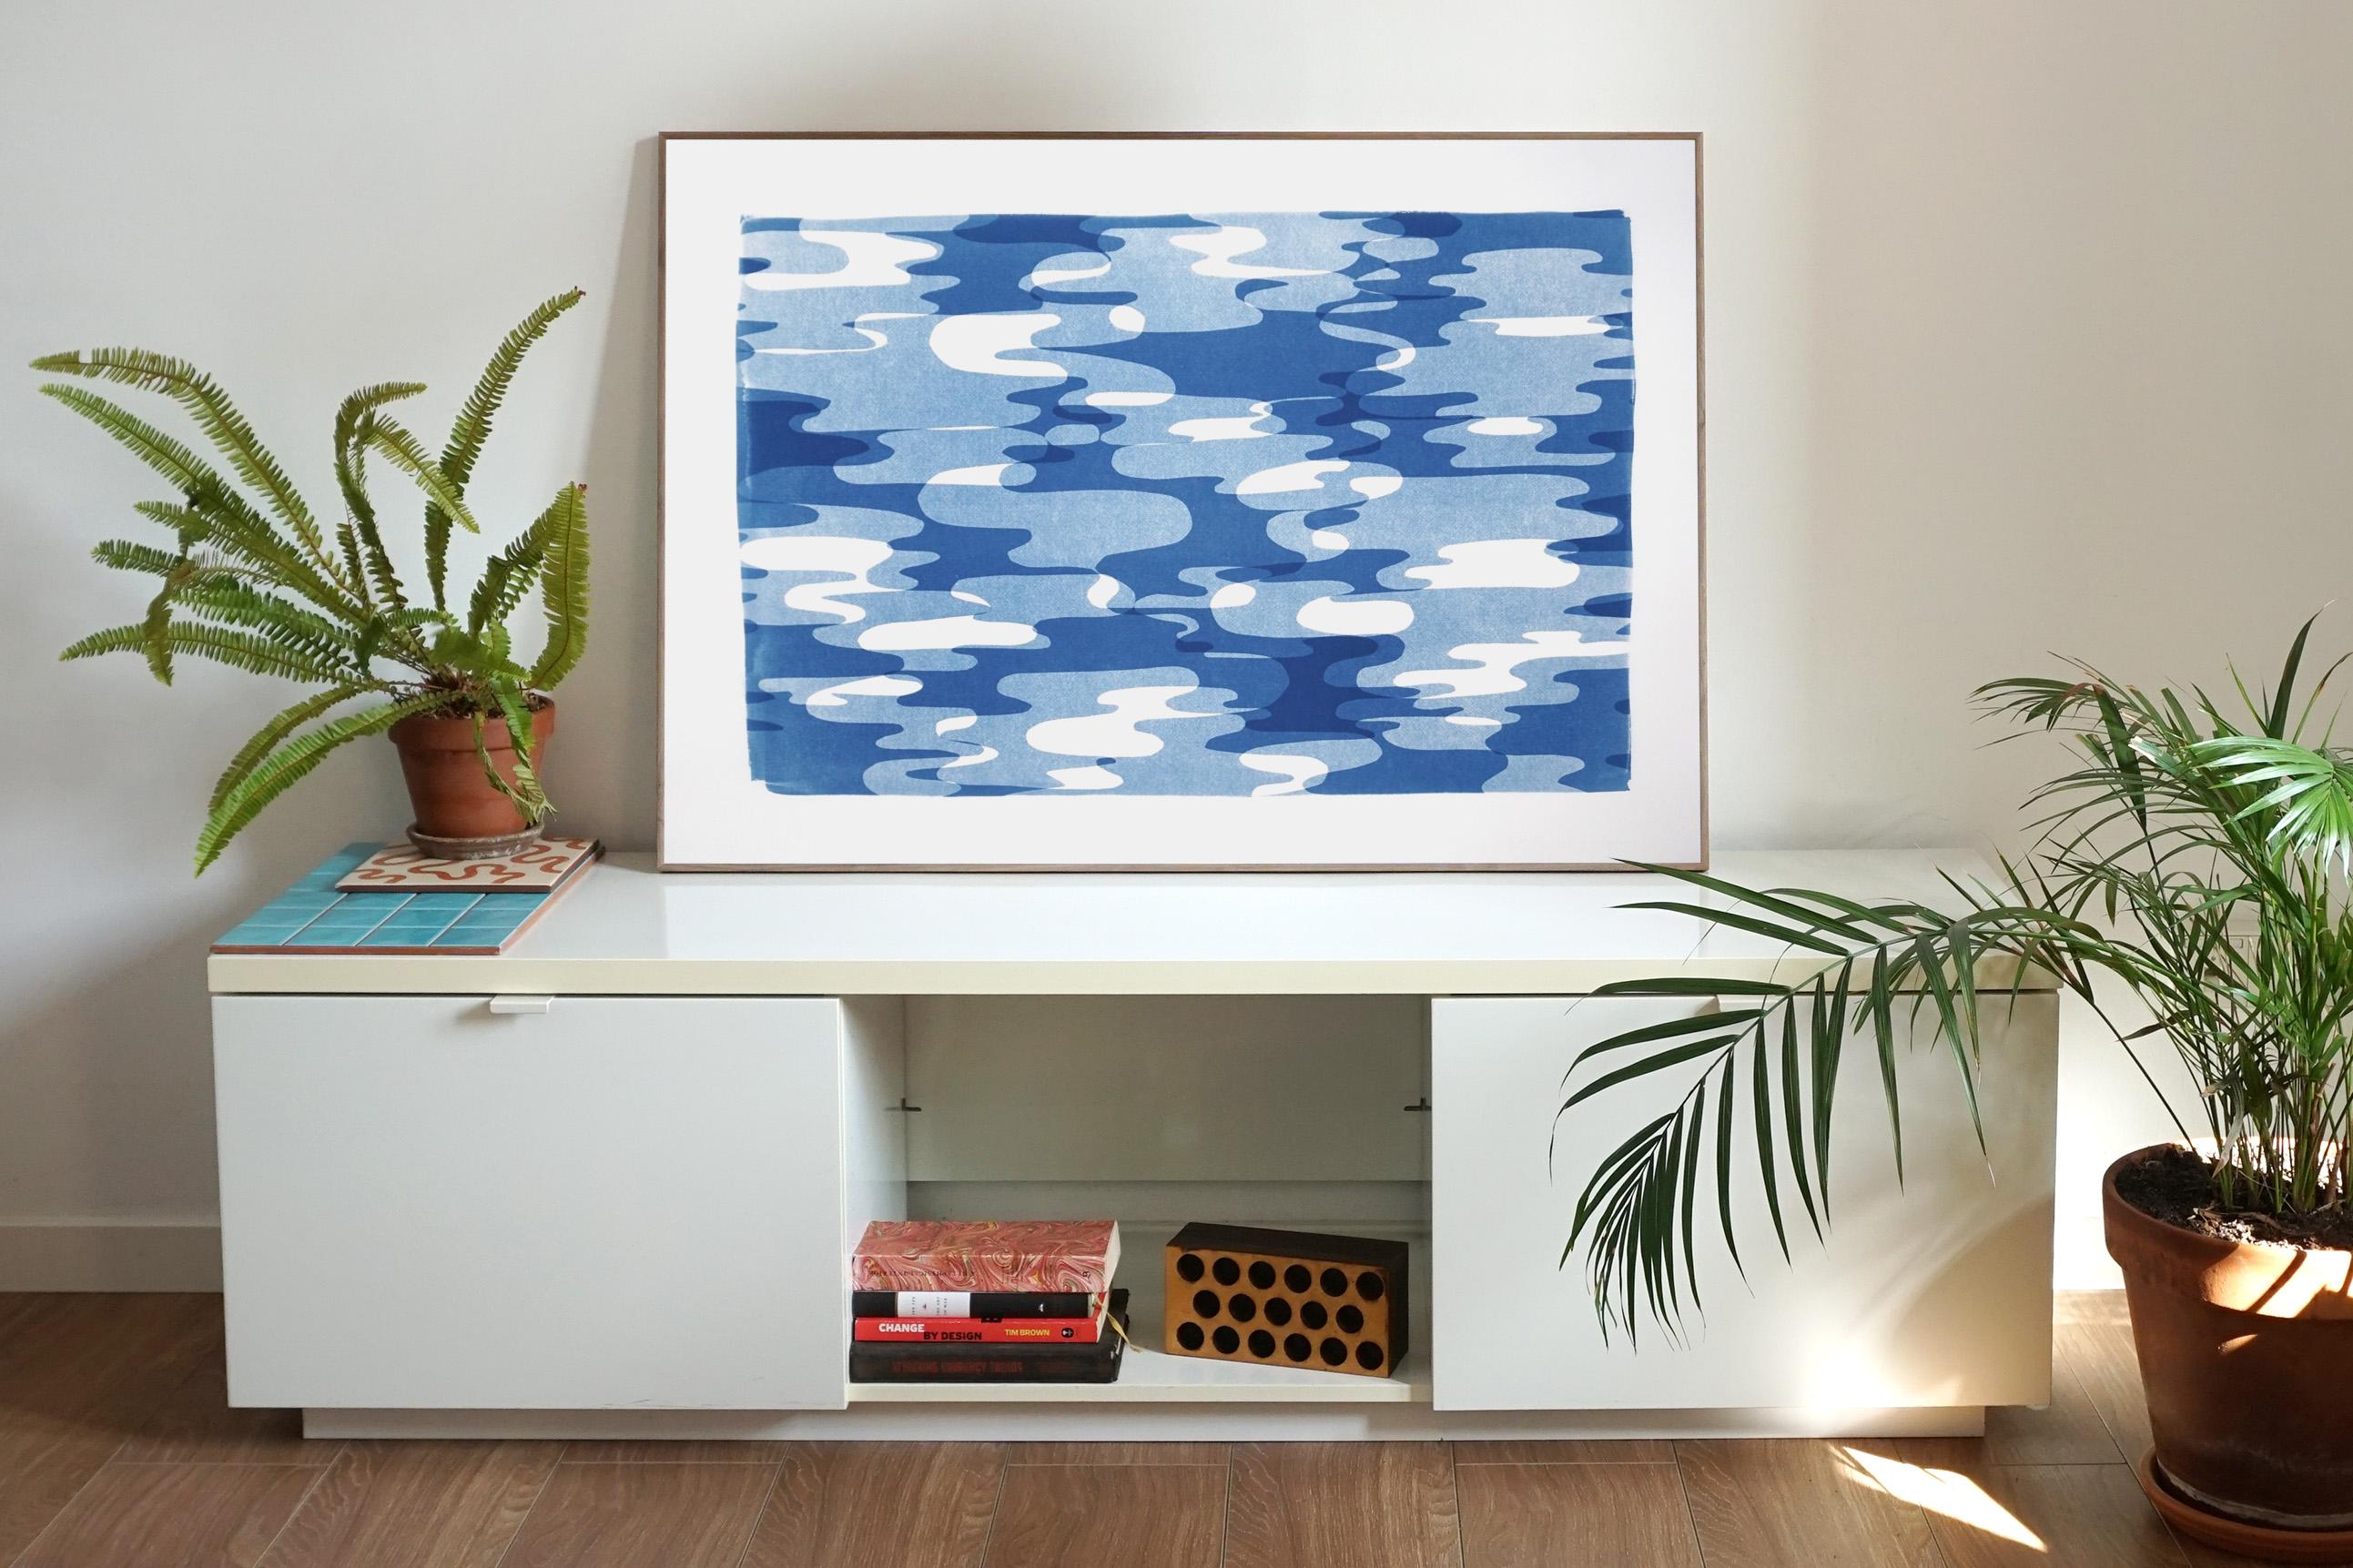 This is an exclusive handprinted unique cyanotype that takes its inspiration from mid-century modern shapes.
It's made by layering paper cutouts and different exposures using uv-light. 

Details:
+ Title: Geometric Water Reflections in Movement II
+